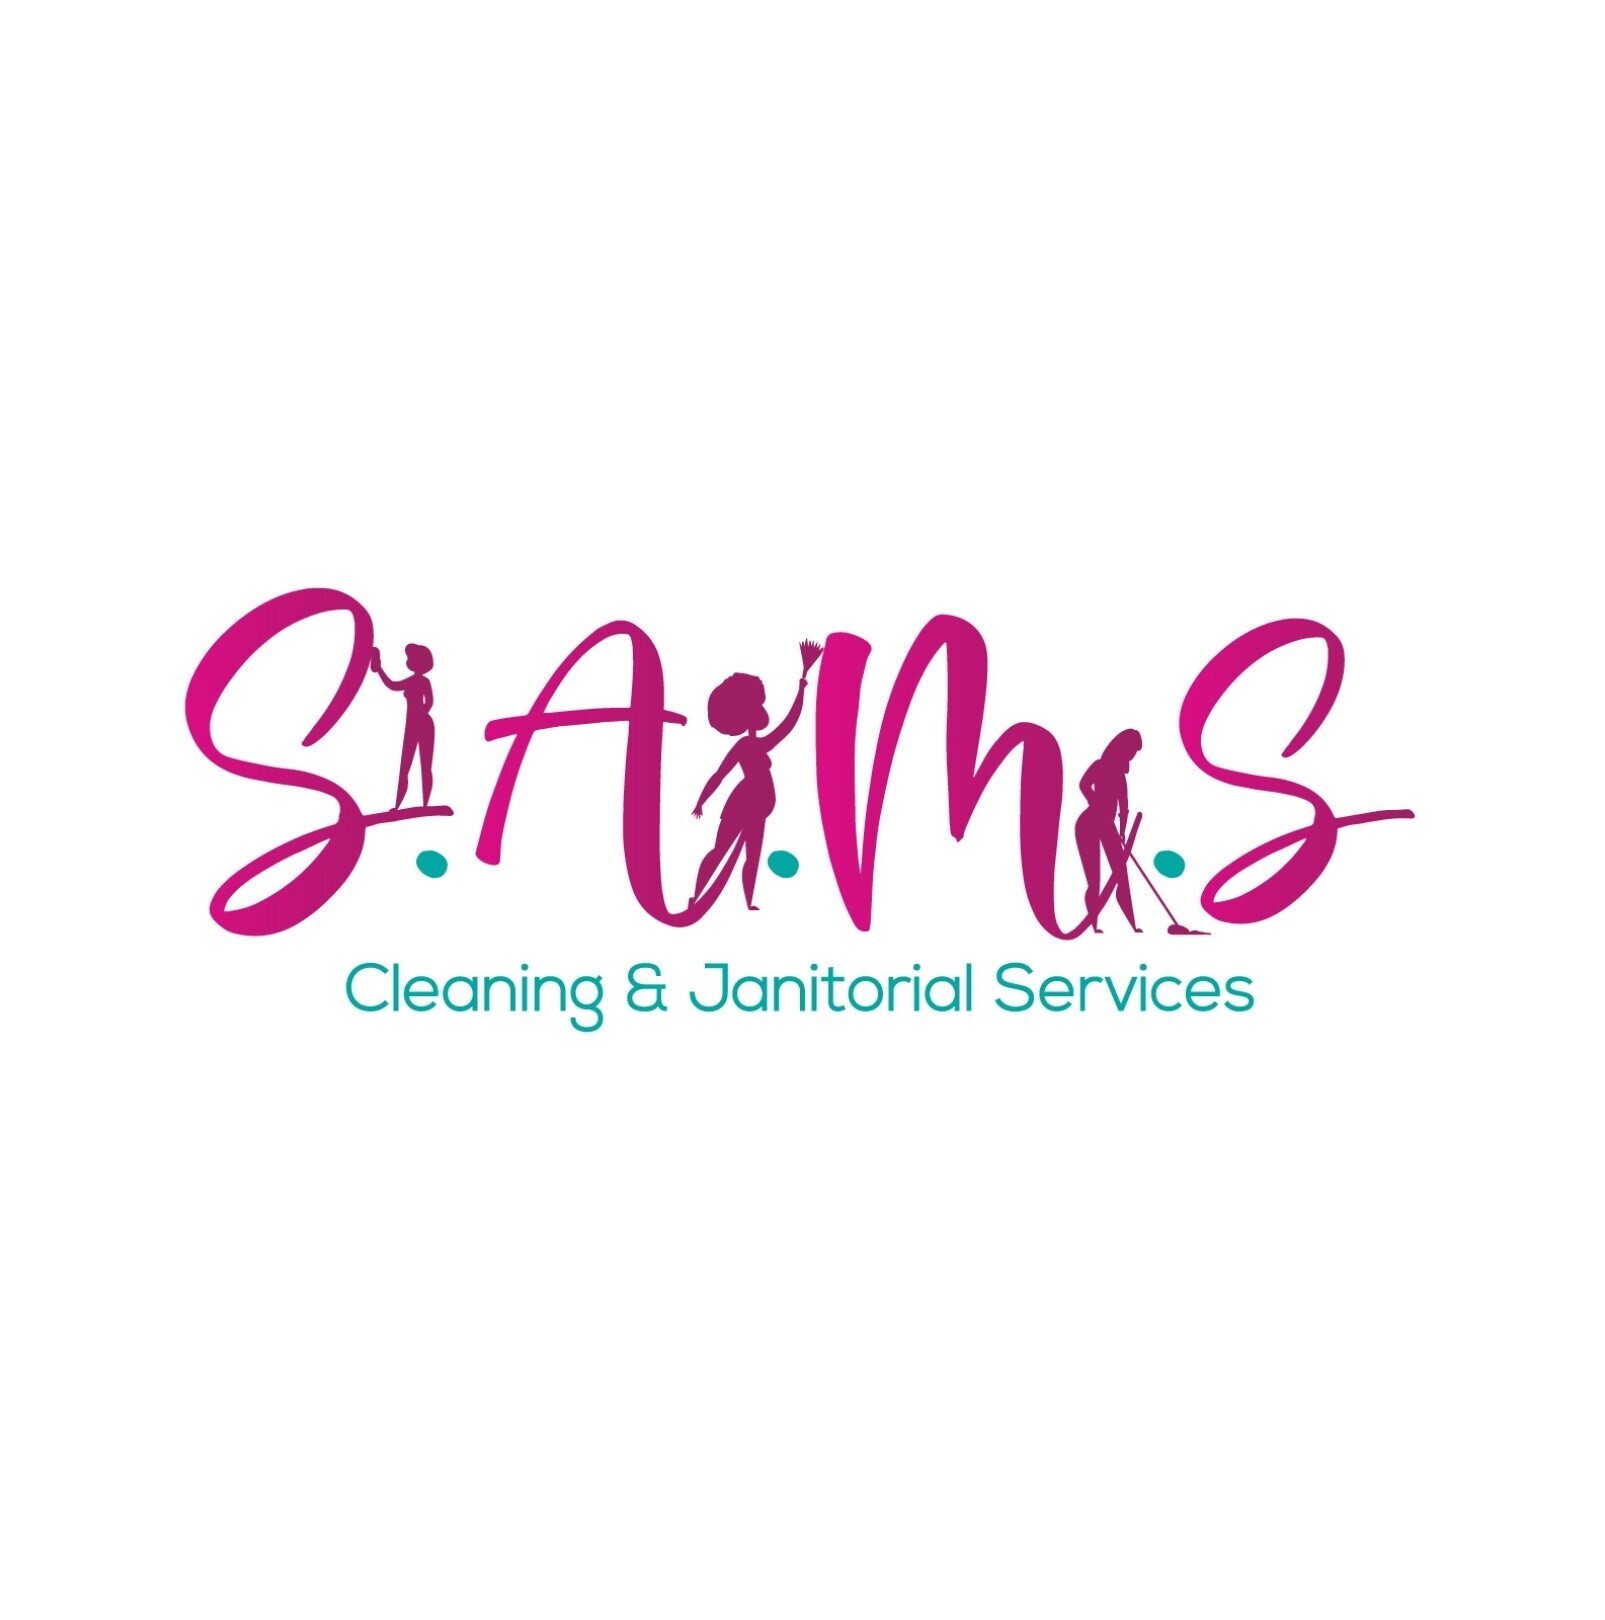 S.A.M.S Cleaning Services